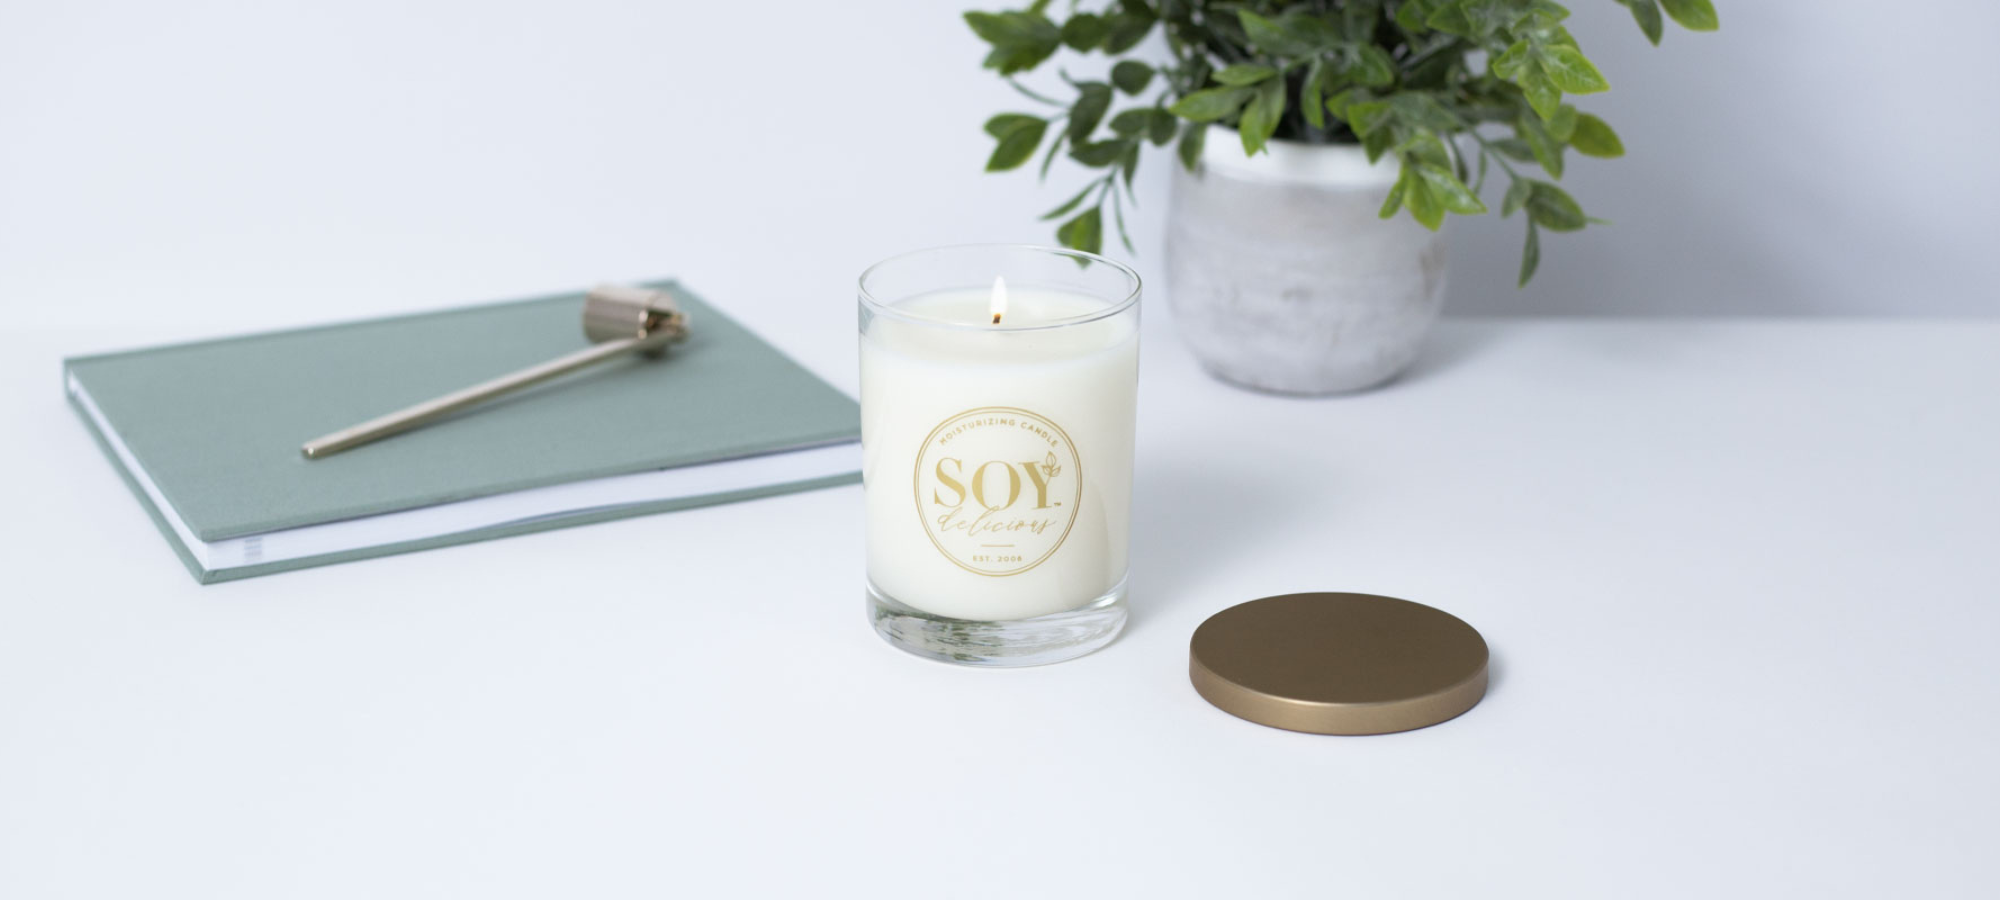 Cotton Wicks: Why They're The Best Wick To Use For A Candle – Soy